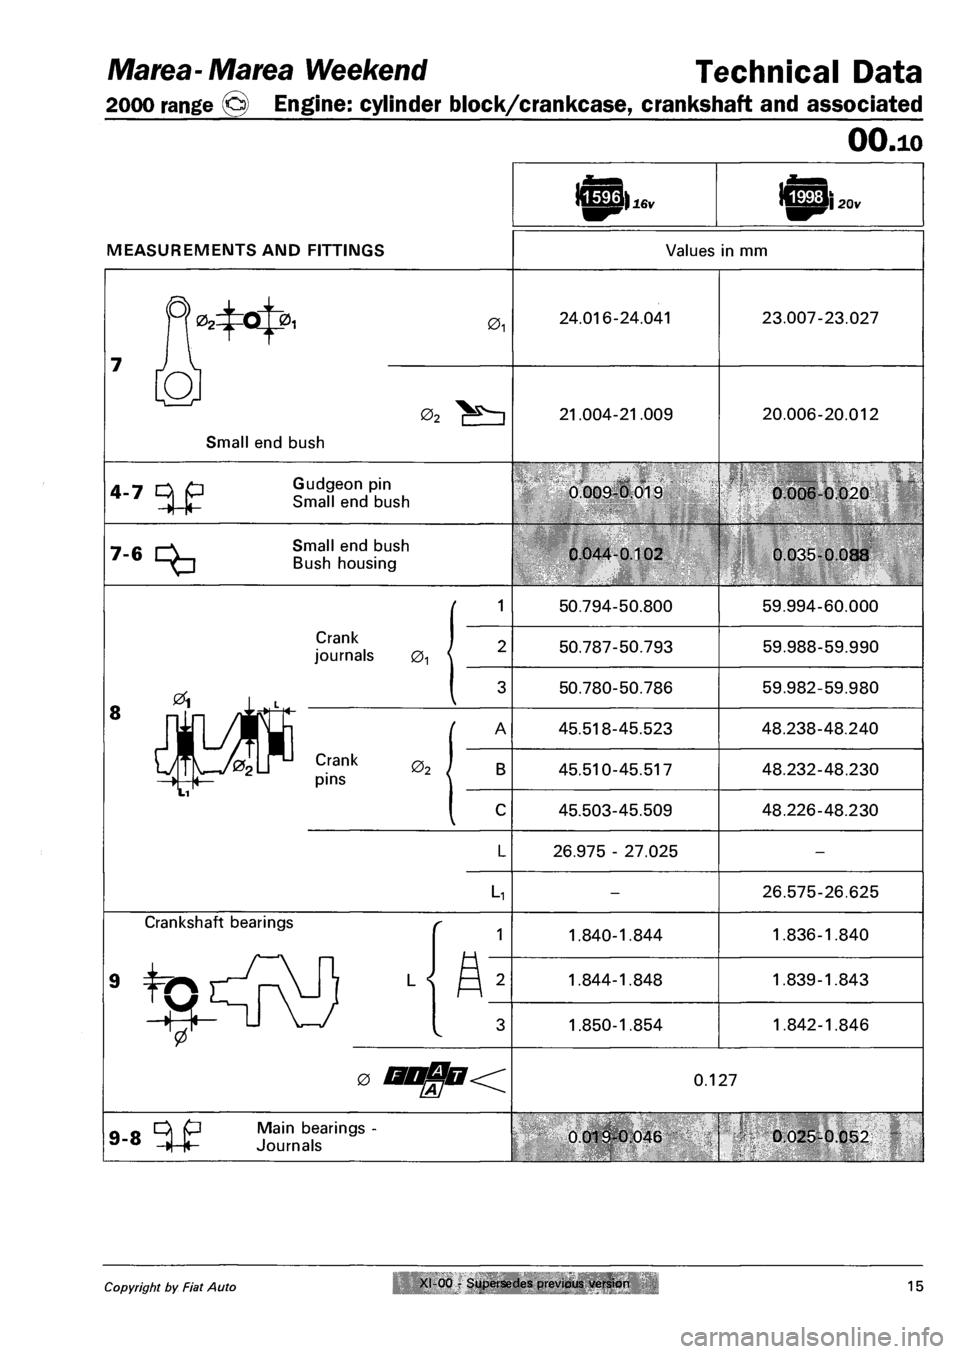 FIAT MAREA 2000 1.G Owners Manual Marea- Marea Weekend Technical Data 
2000 range © Engine: cylinder block/crankcase, crankshaft and associated 
OO.io 
MEASUREMENTS AND FITTINGS 
16v mi 20v 
Values in mm 
01 24.016-24.041 
02 21.004-